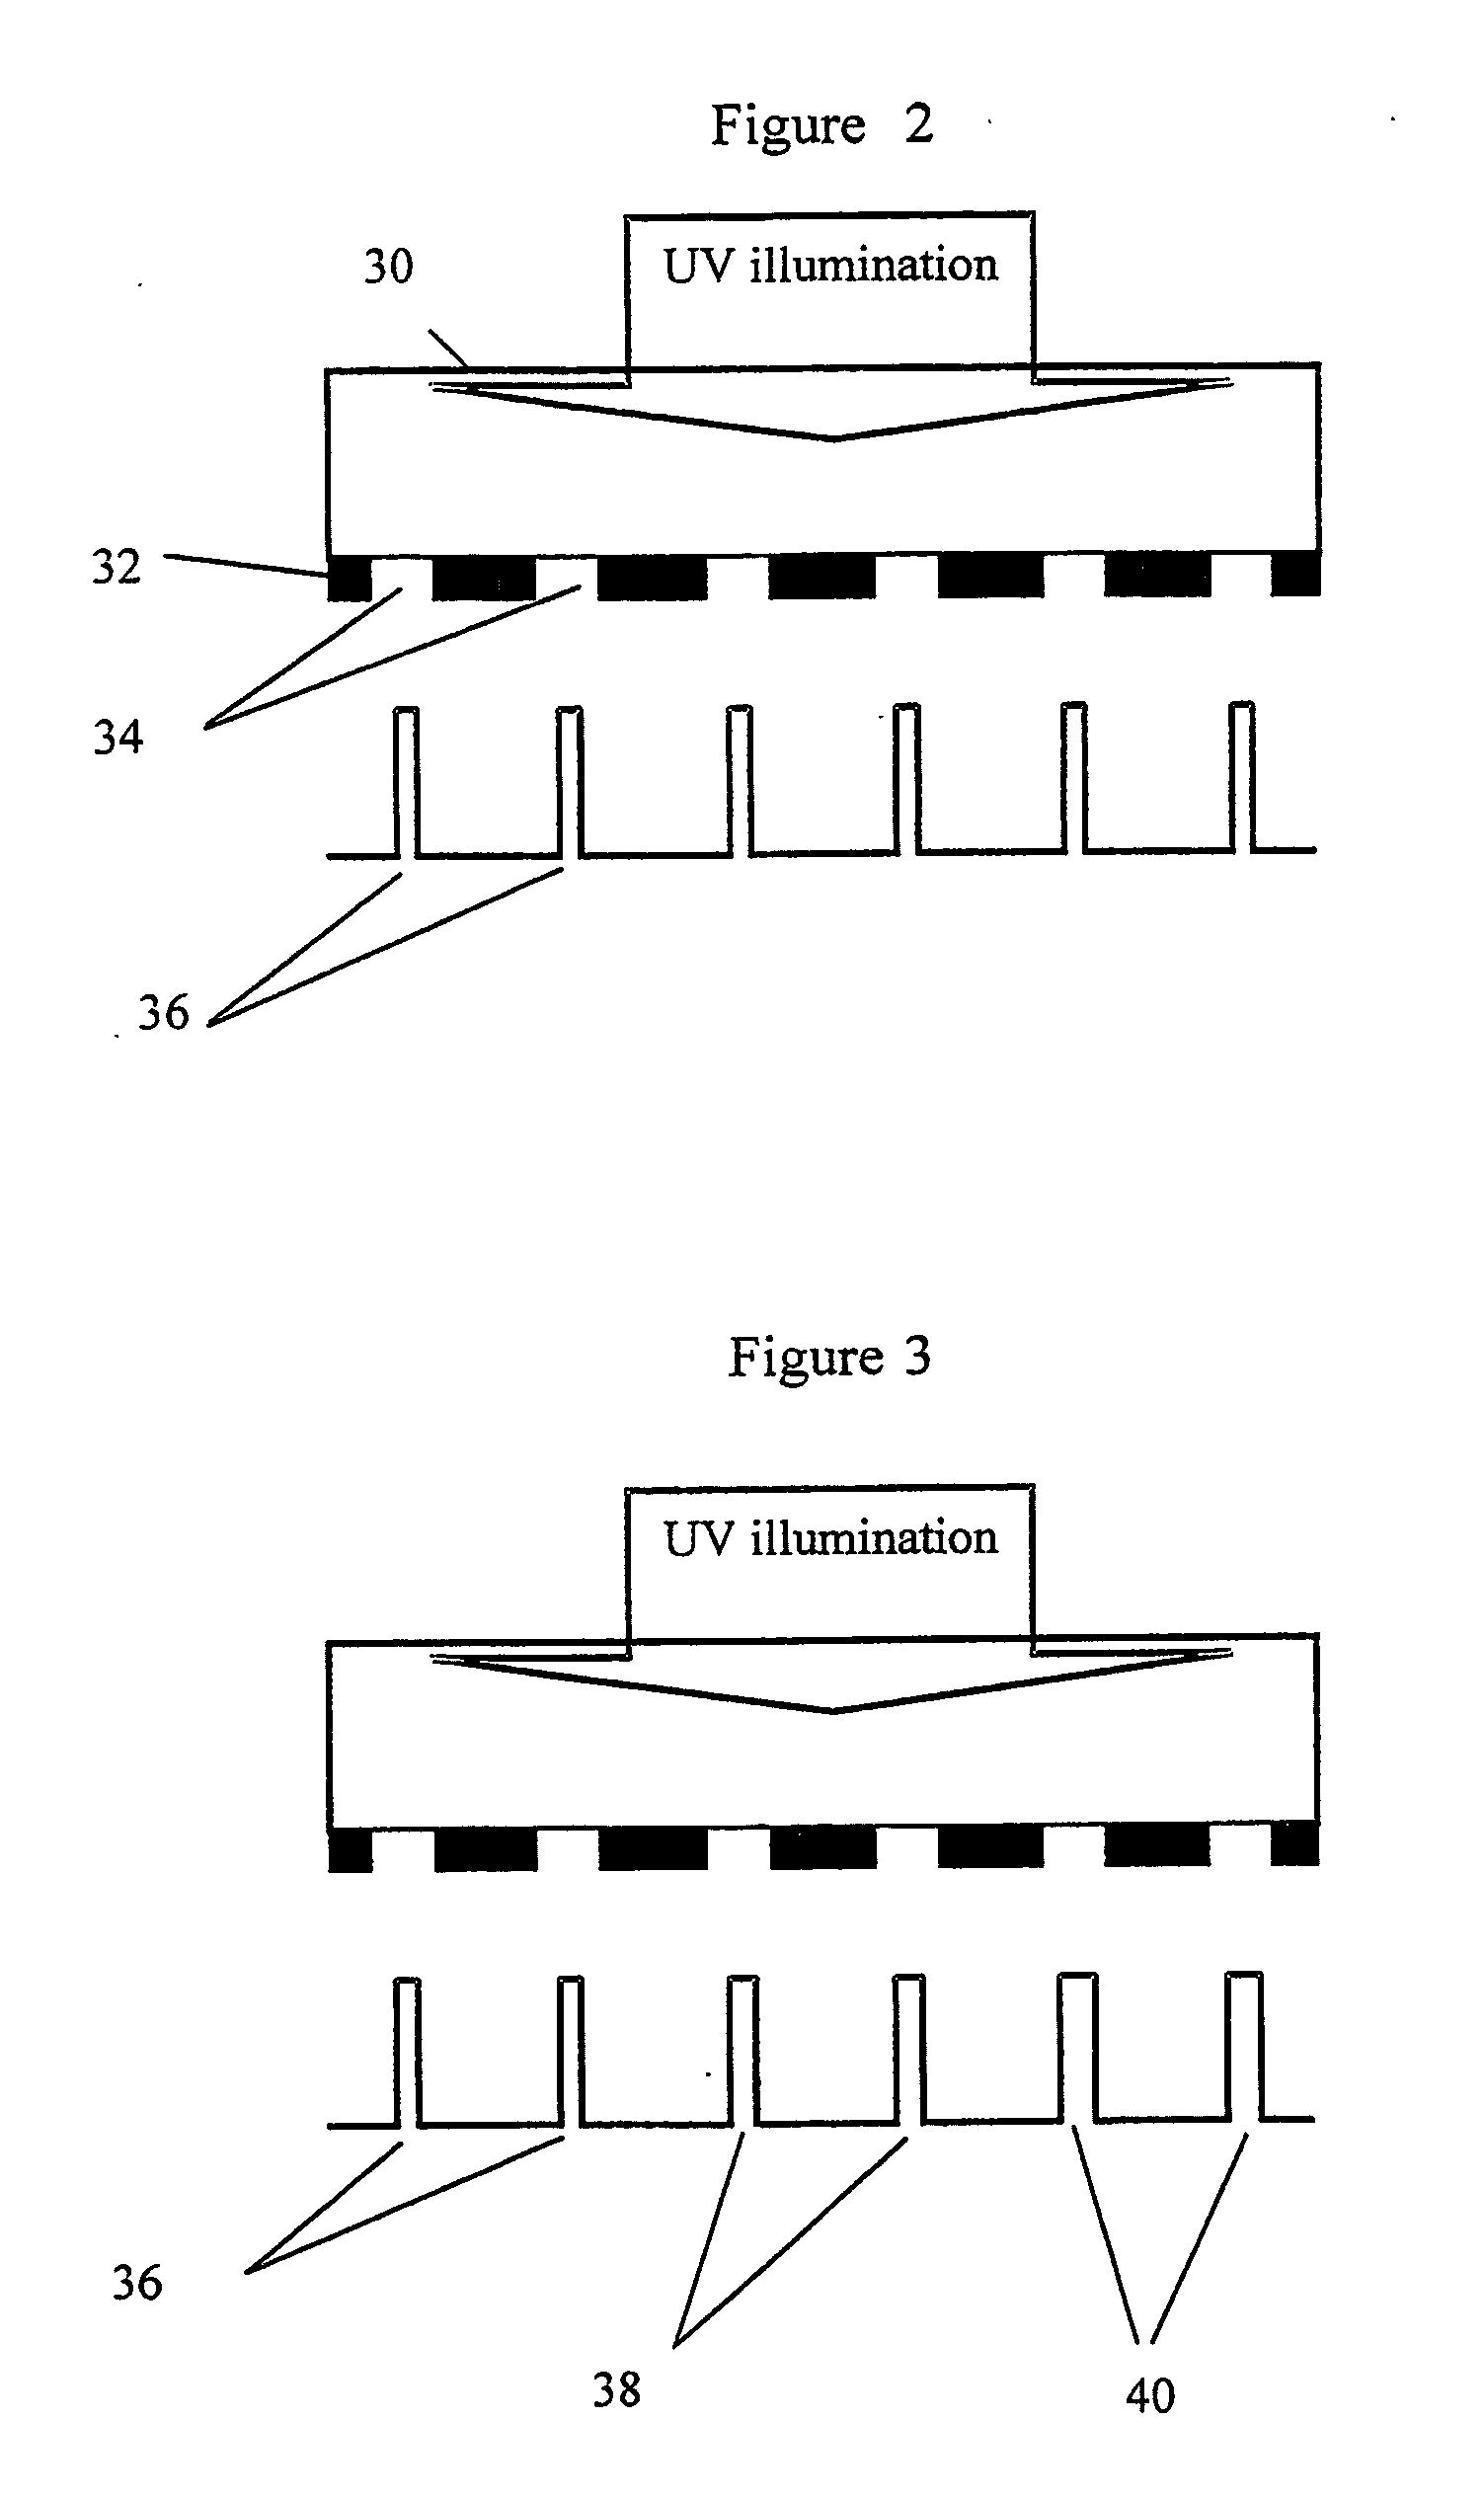 Method for correcting critical dimension variations in photomasks